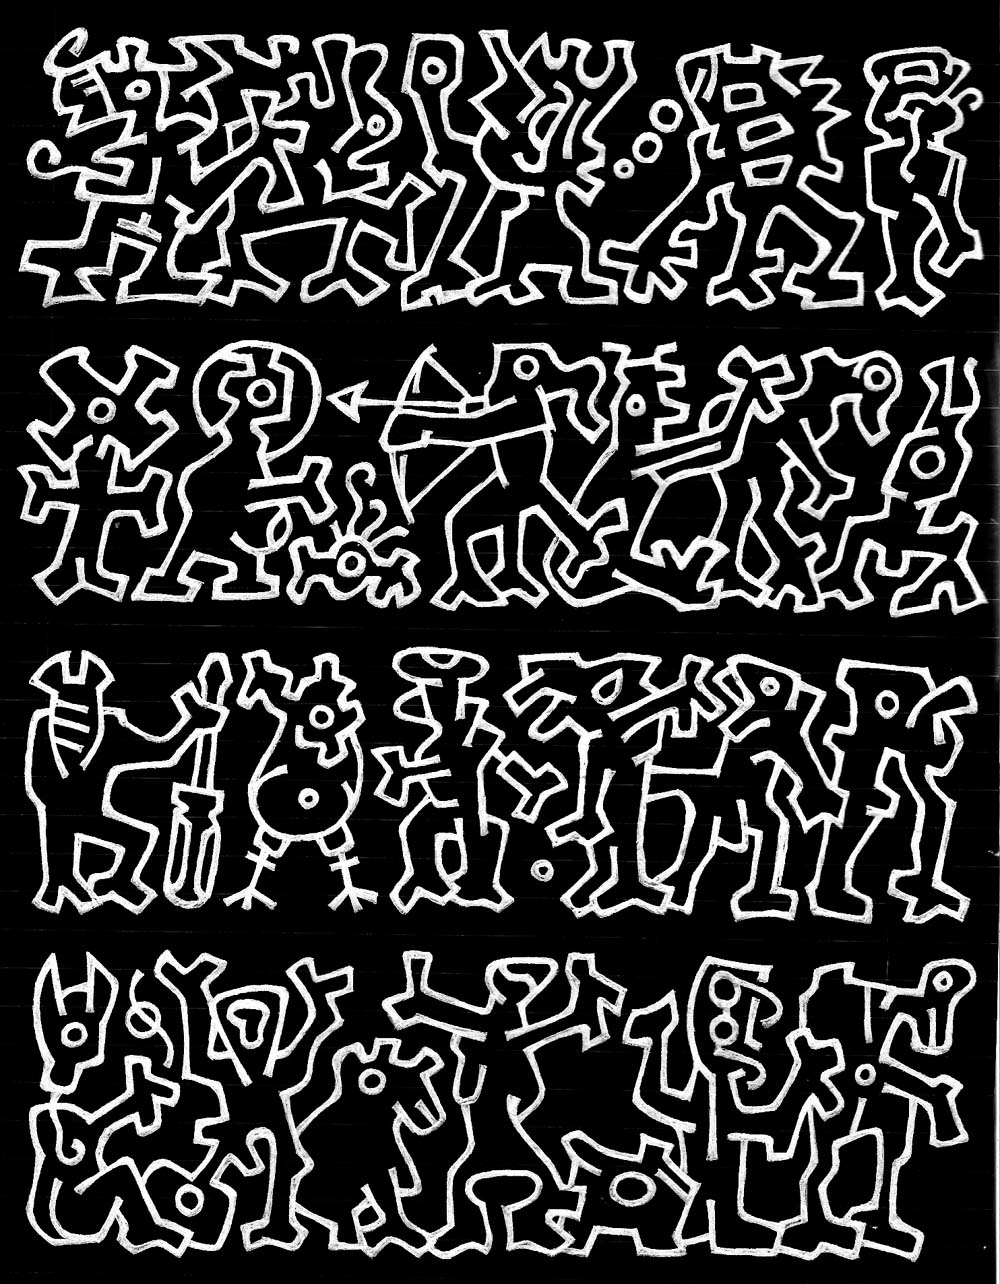 asemic writing - sequence of glyphs, like more complex versions of rongorongo